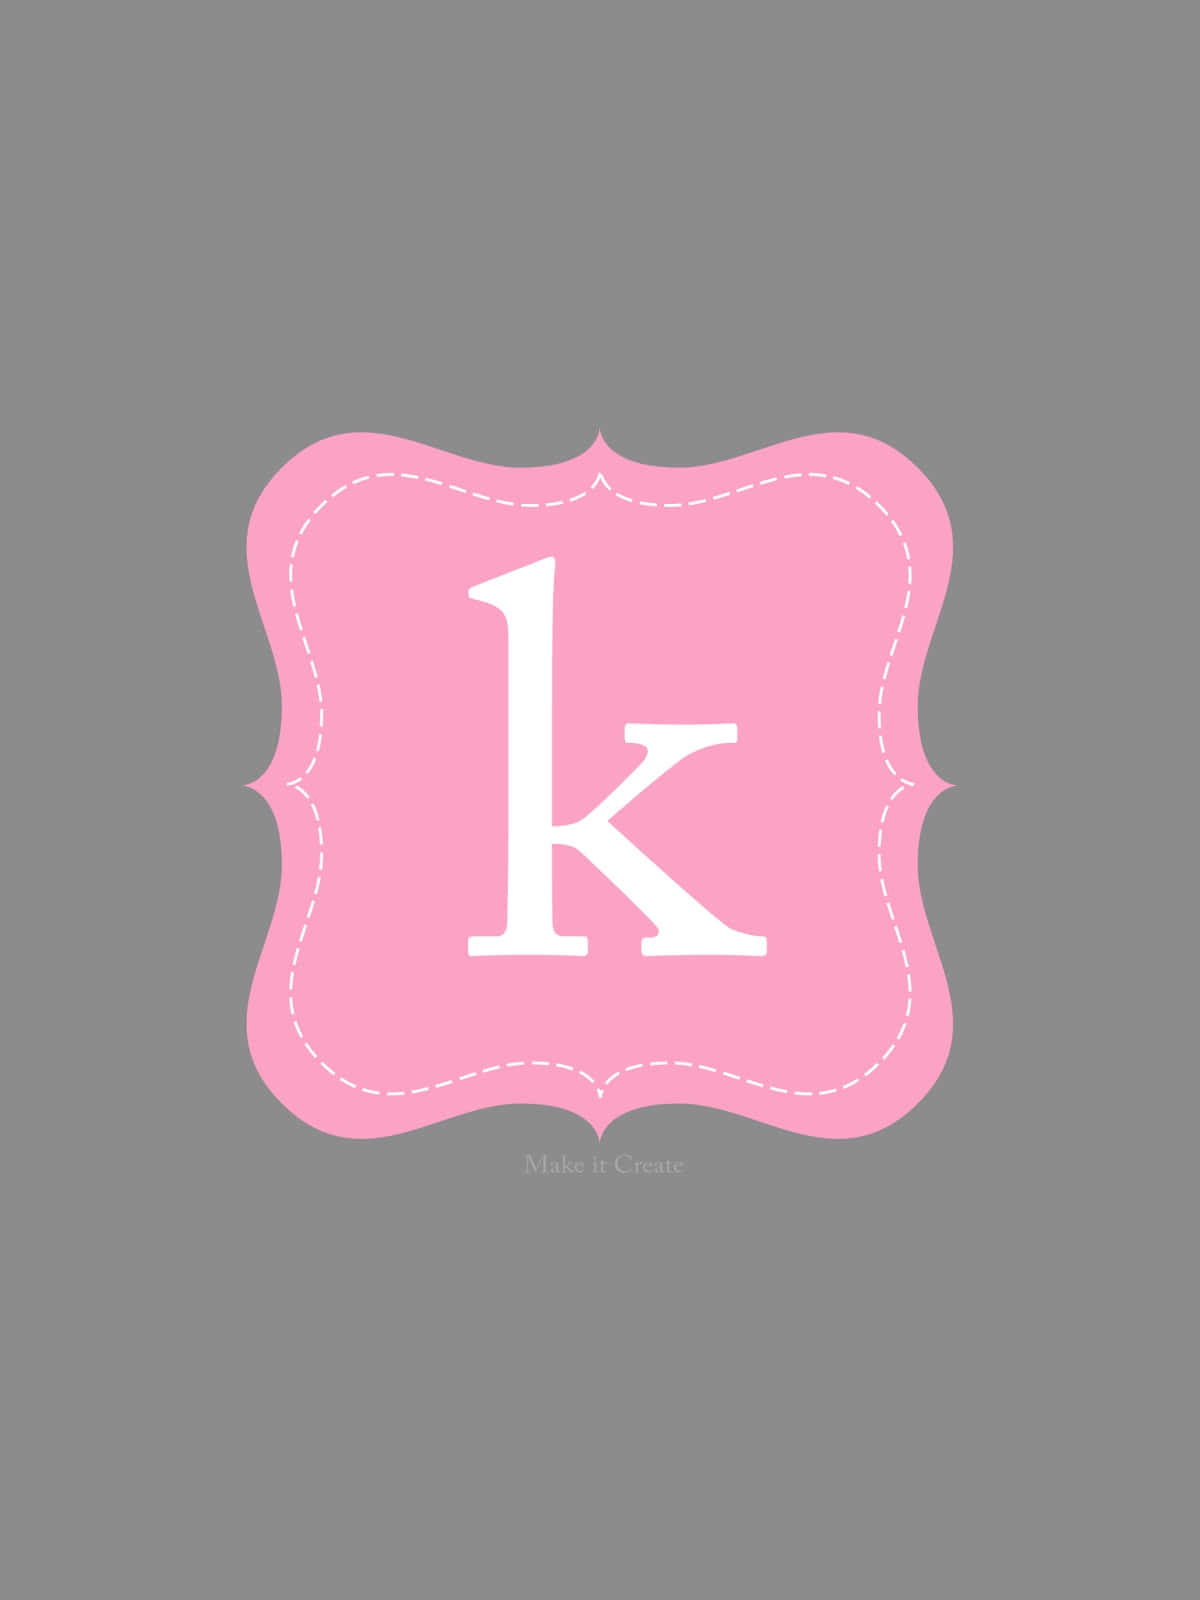 A Pink And White Letter K On A Gray Background